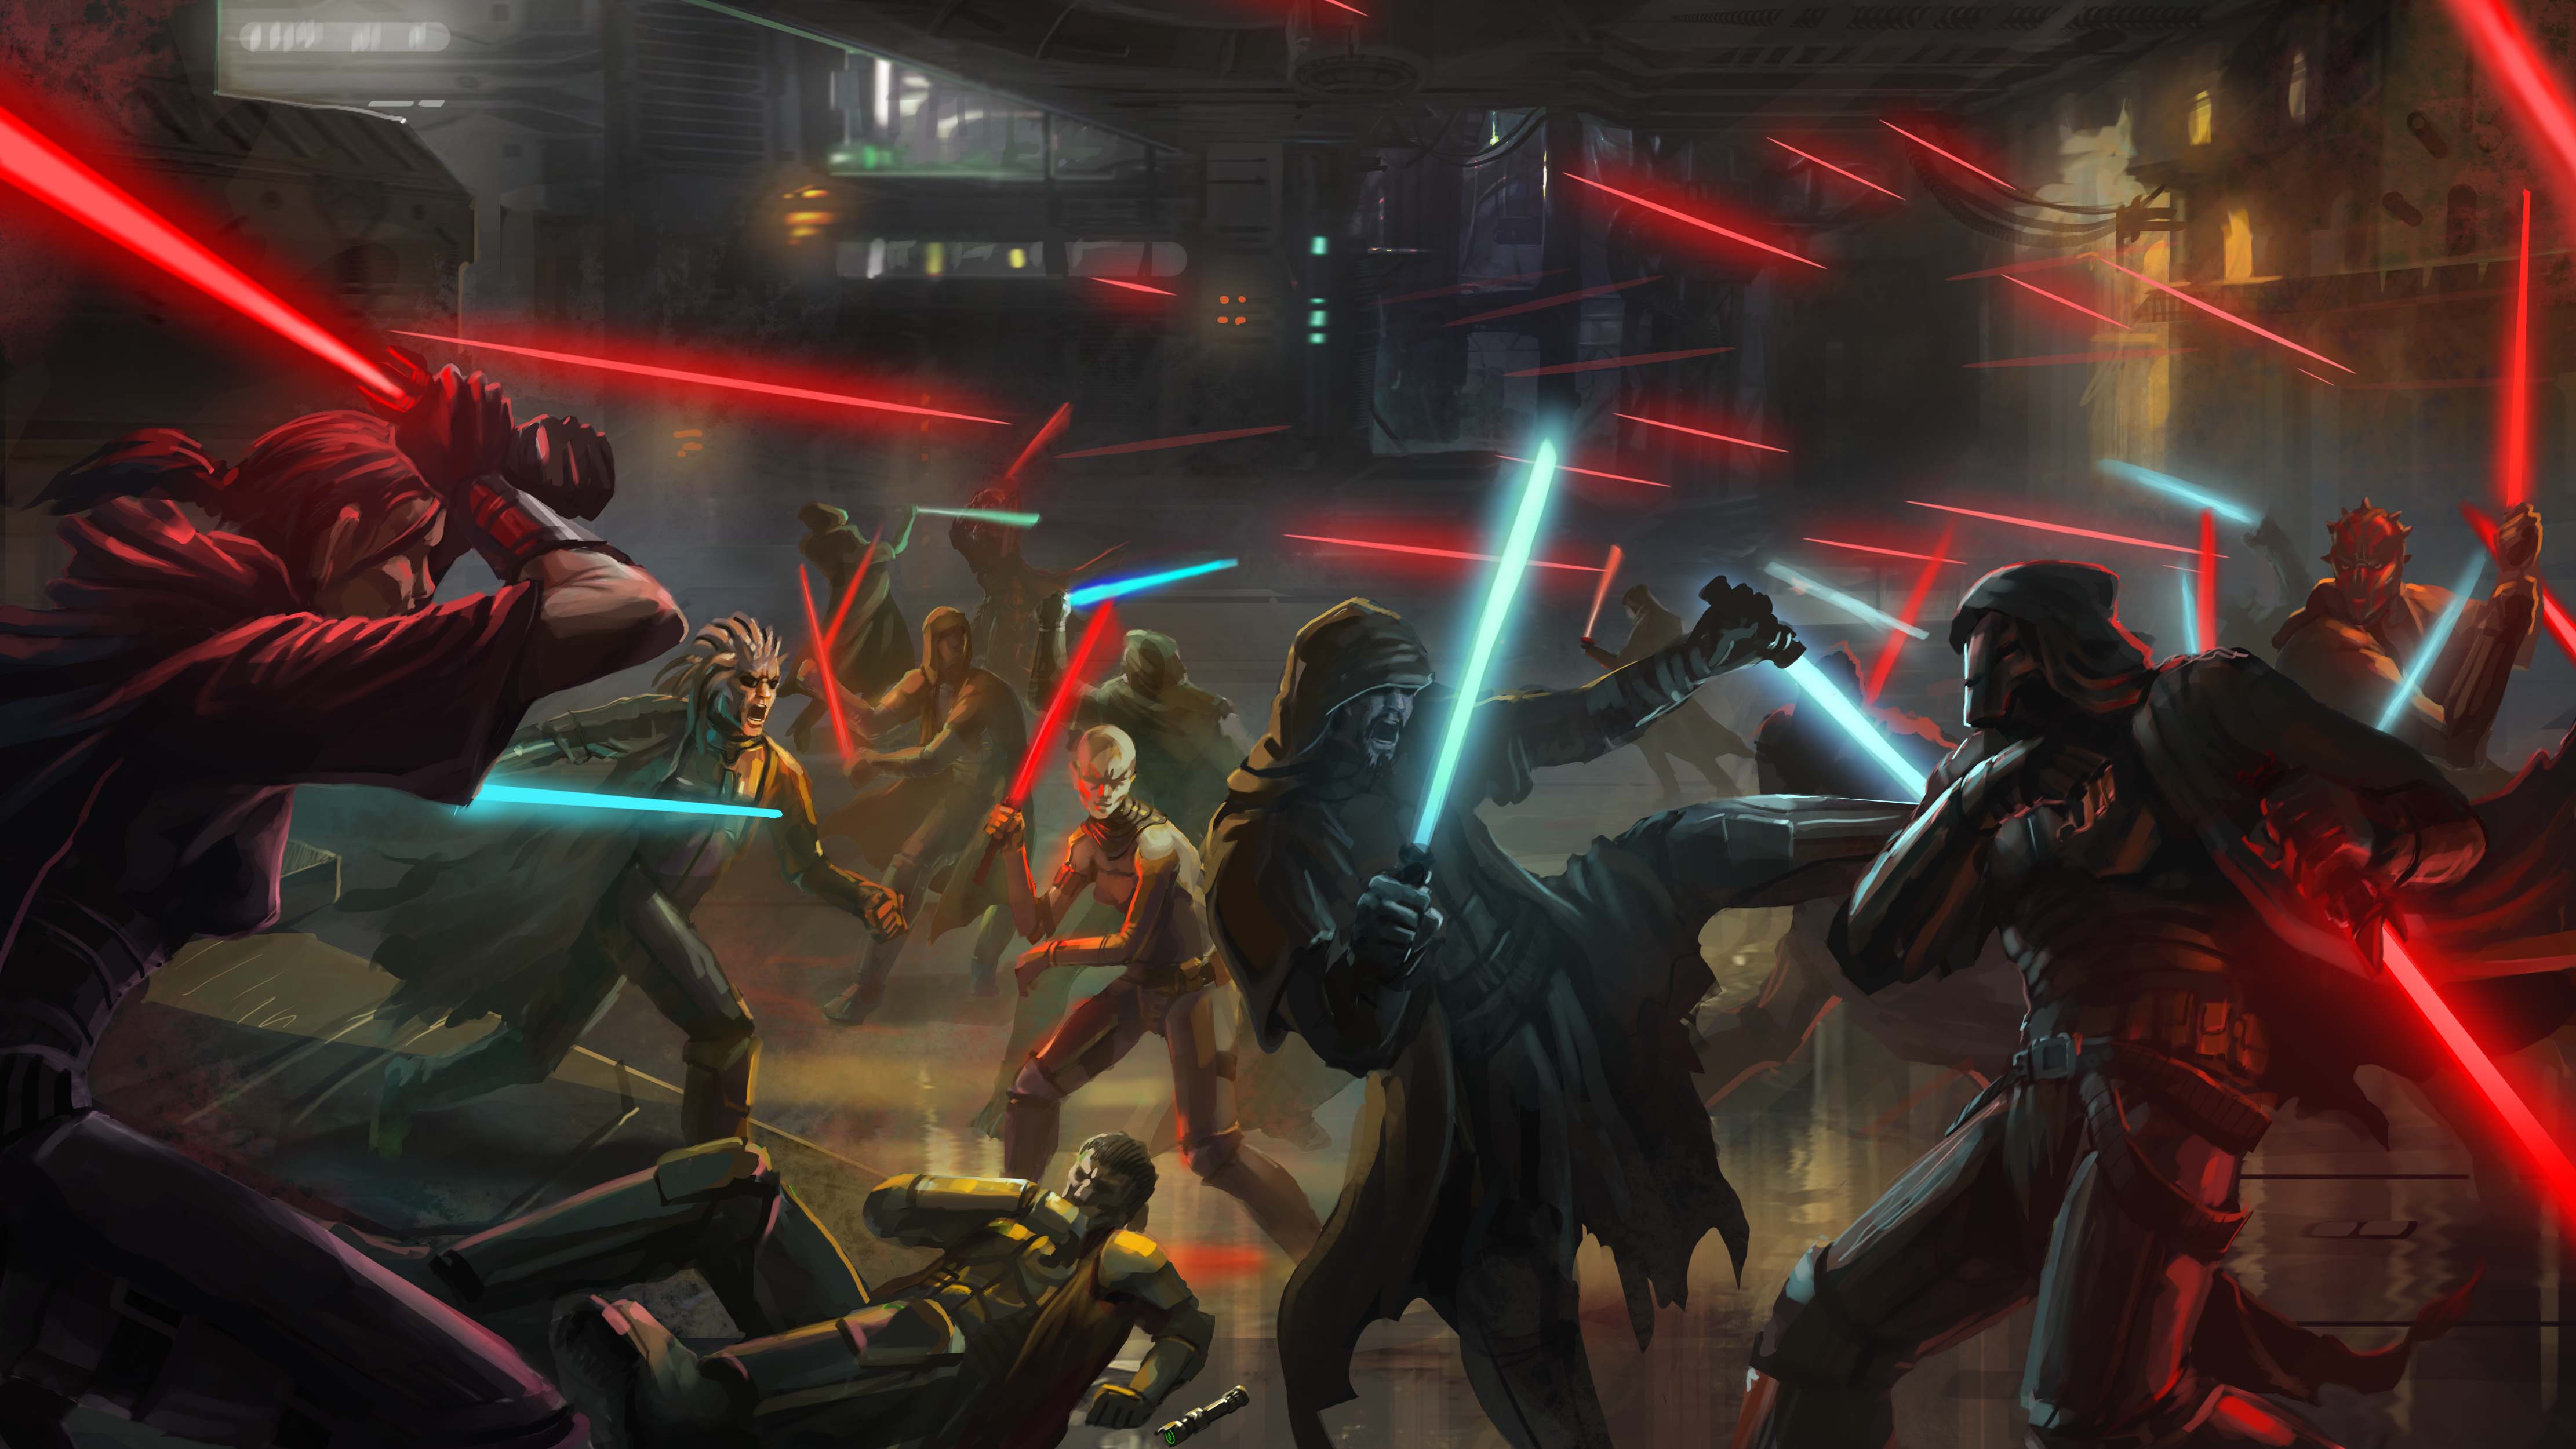 image For > Star Wars The Old Republic Sith Wallpaper